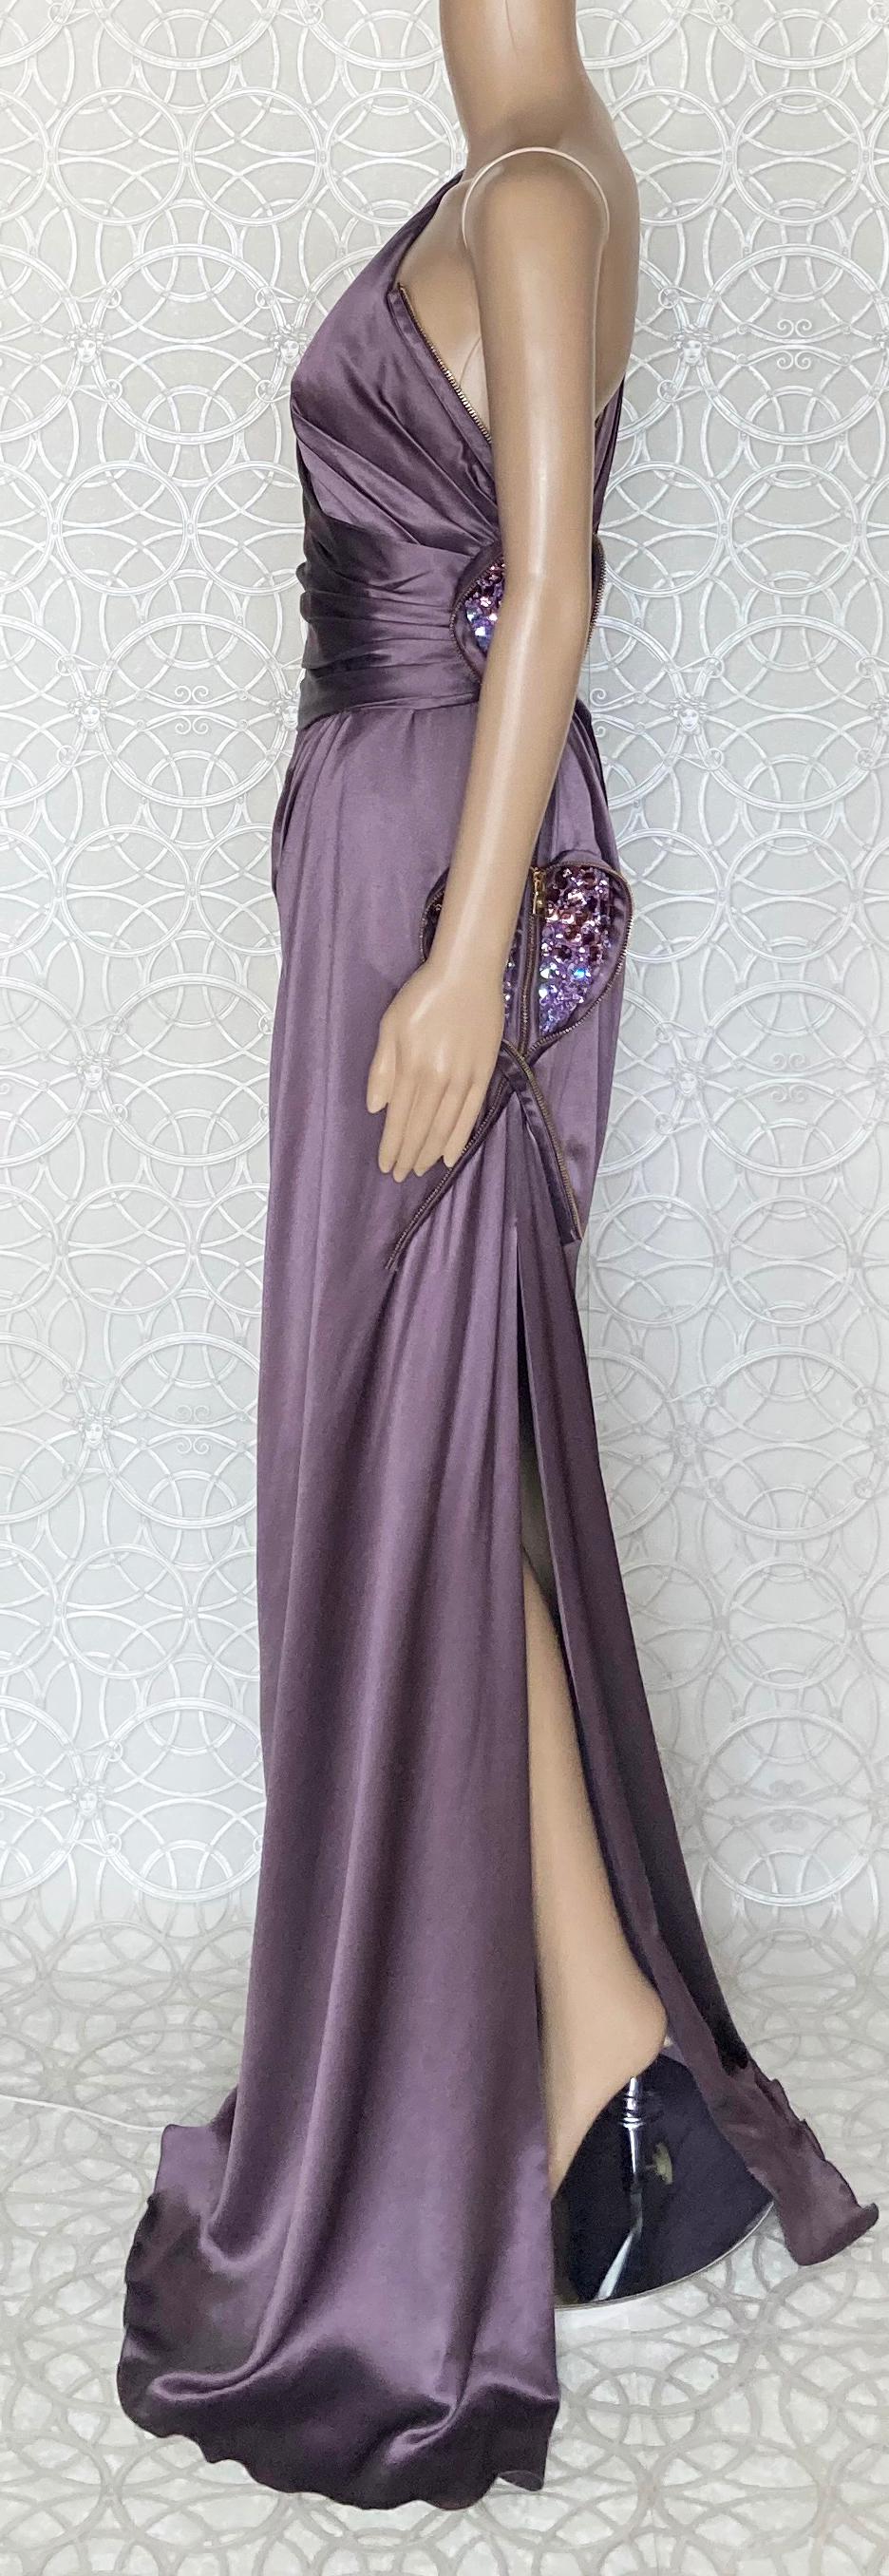 S/S 2009 L# 37 VERSACE ONE SHOULDER PURPLE LONG DRESS GOWN With HEARTS 46 - 10 In New Condition For Sale In Montgomery, TX